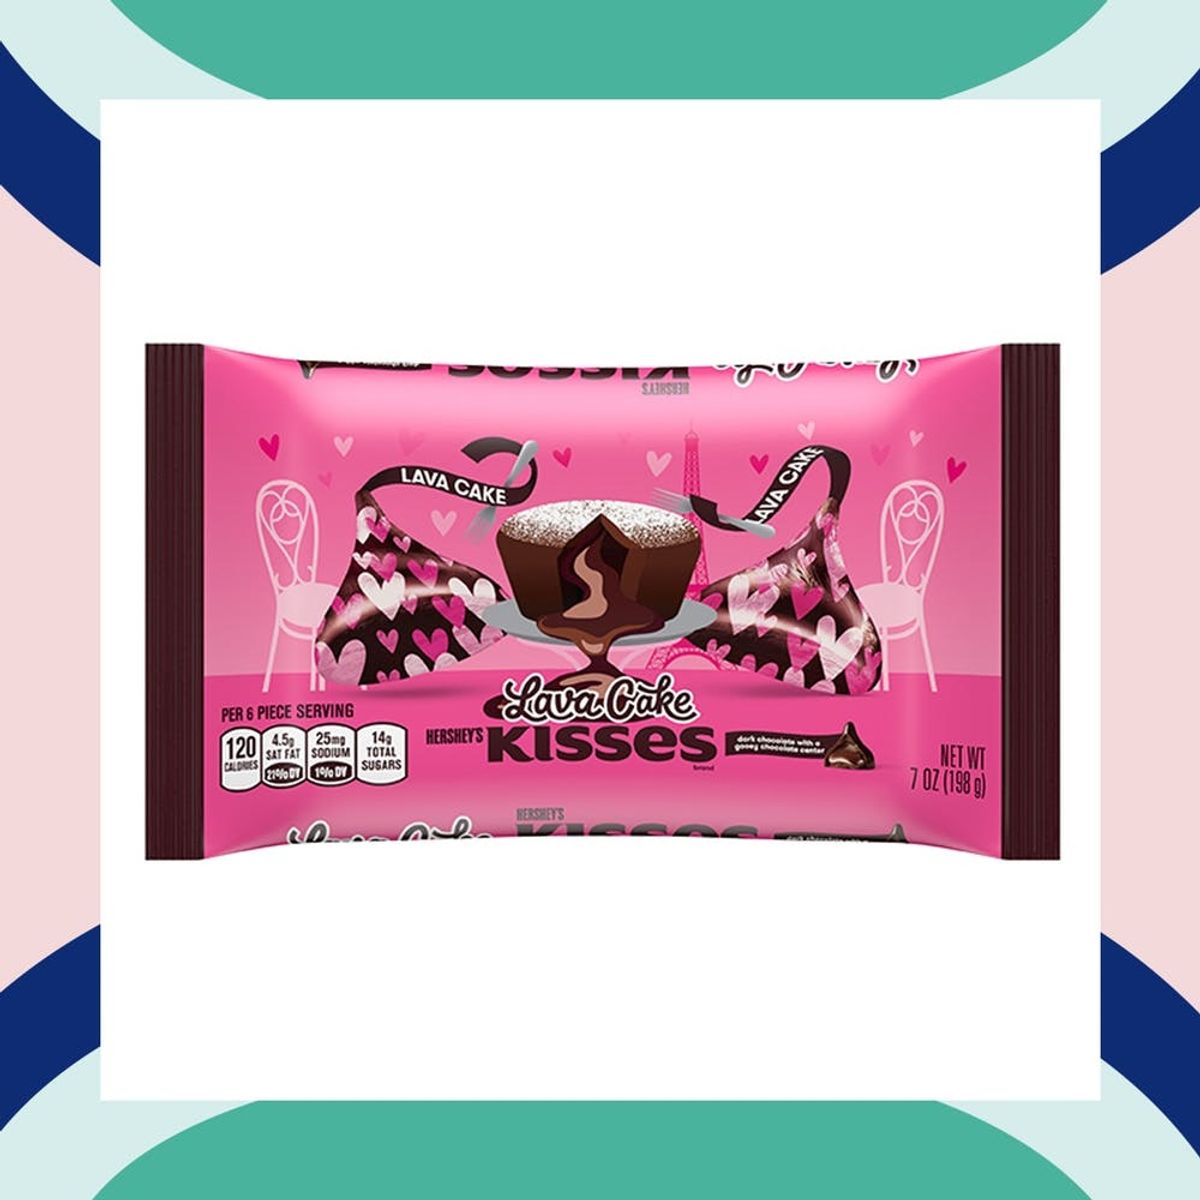 Hershey’s Is Already Celebrating Valentine’s Day With Lava Cake Kisses